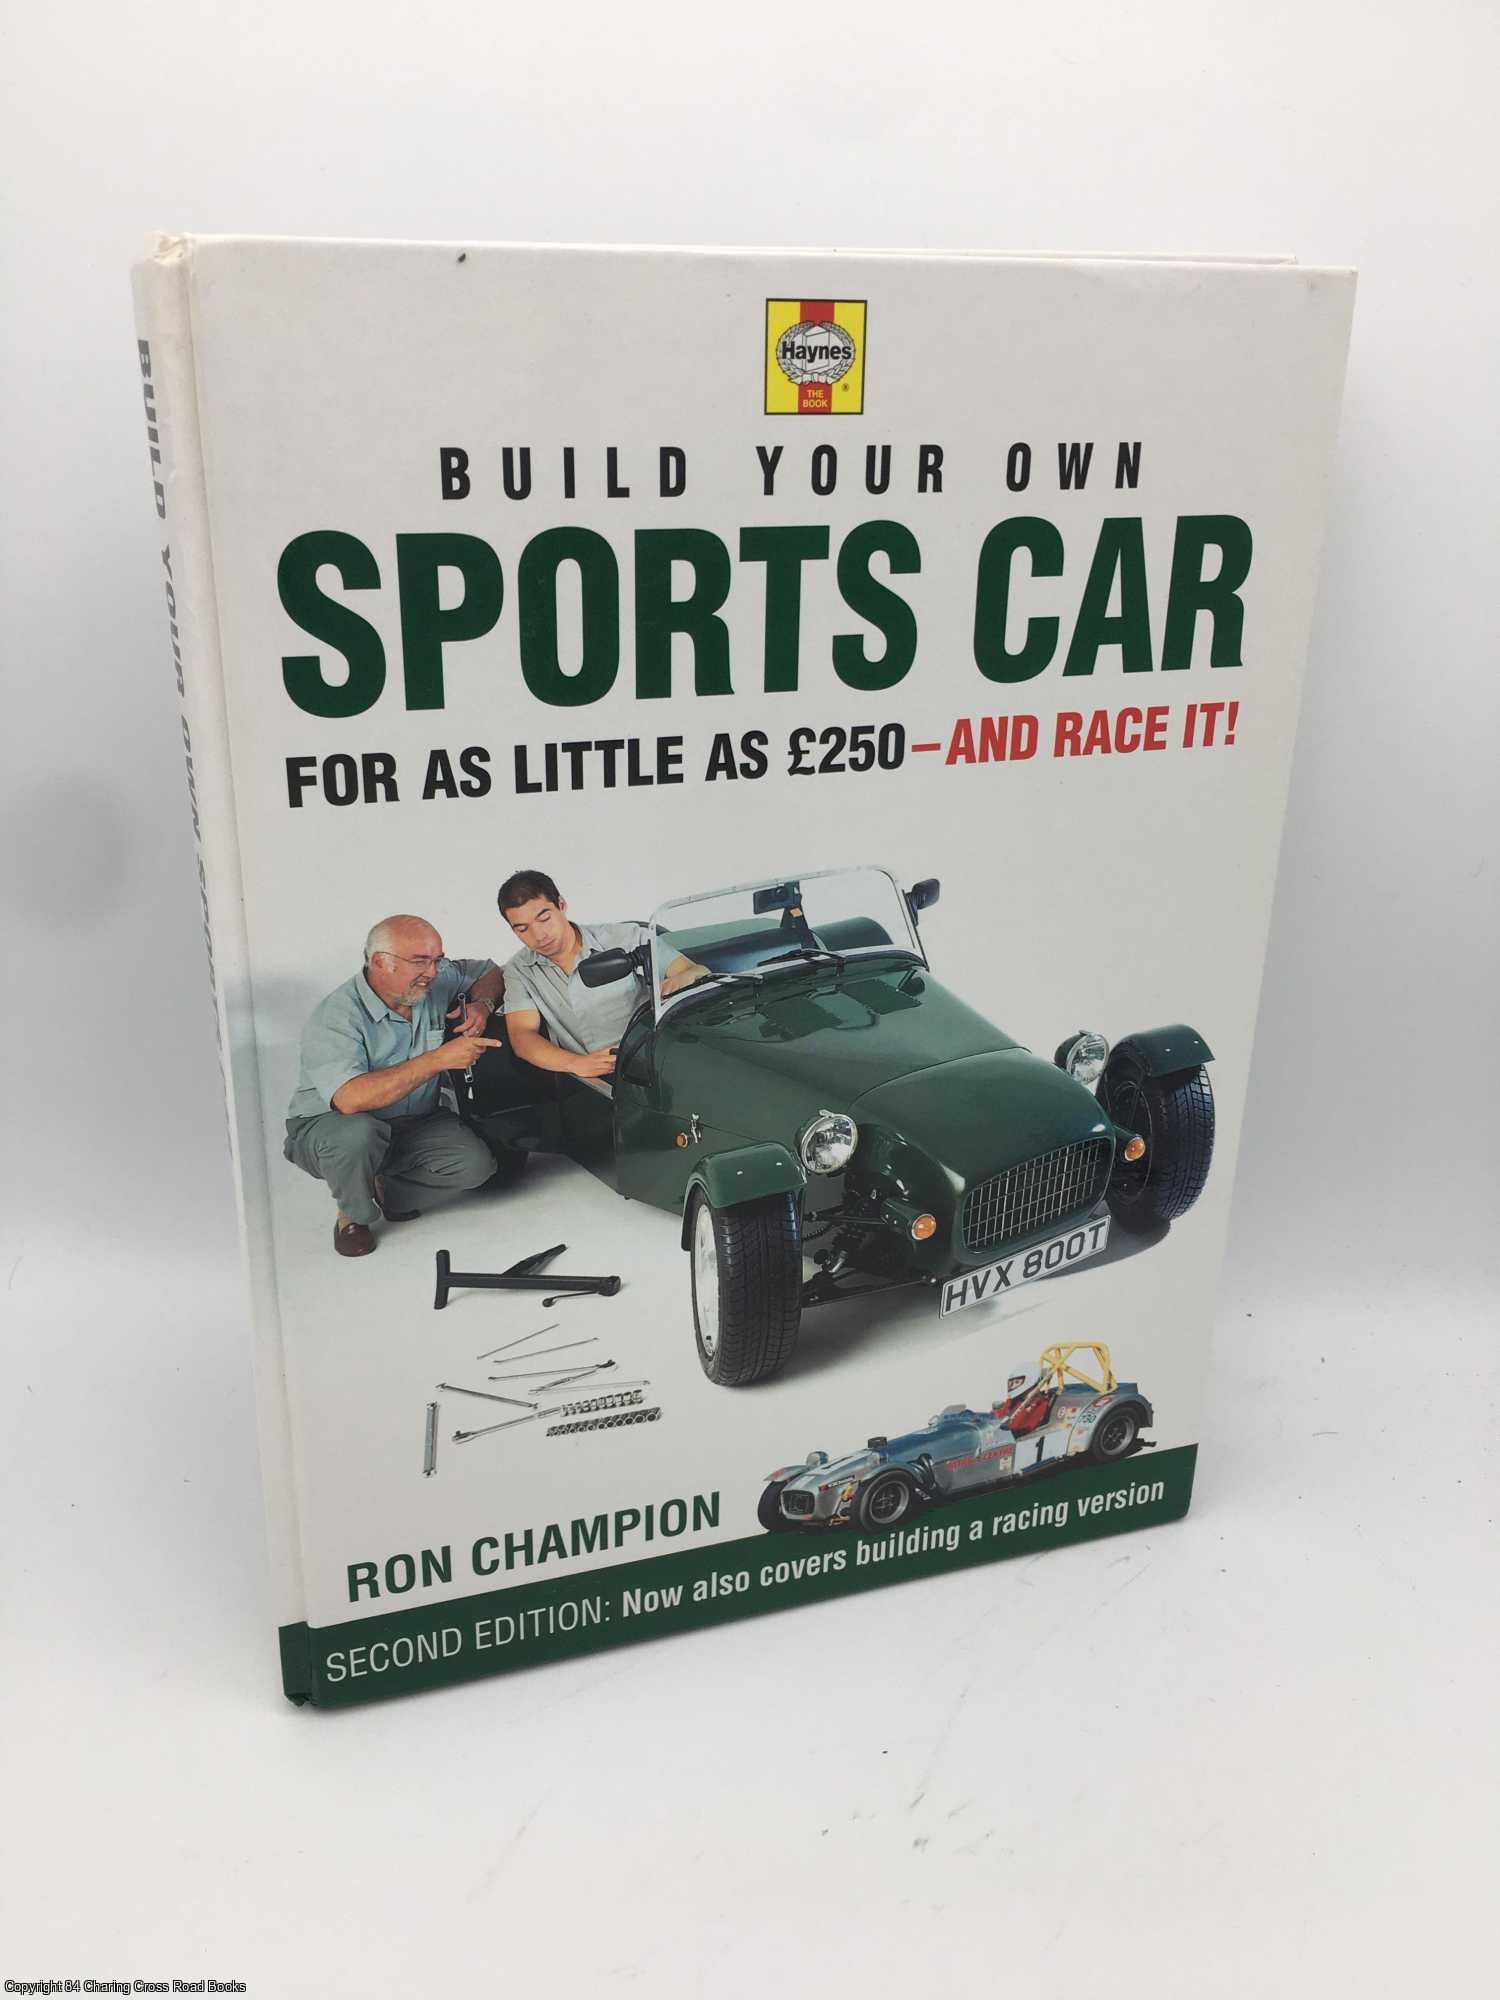 Champion, Ron - Build Your Own Sports Car for as Little as 250